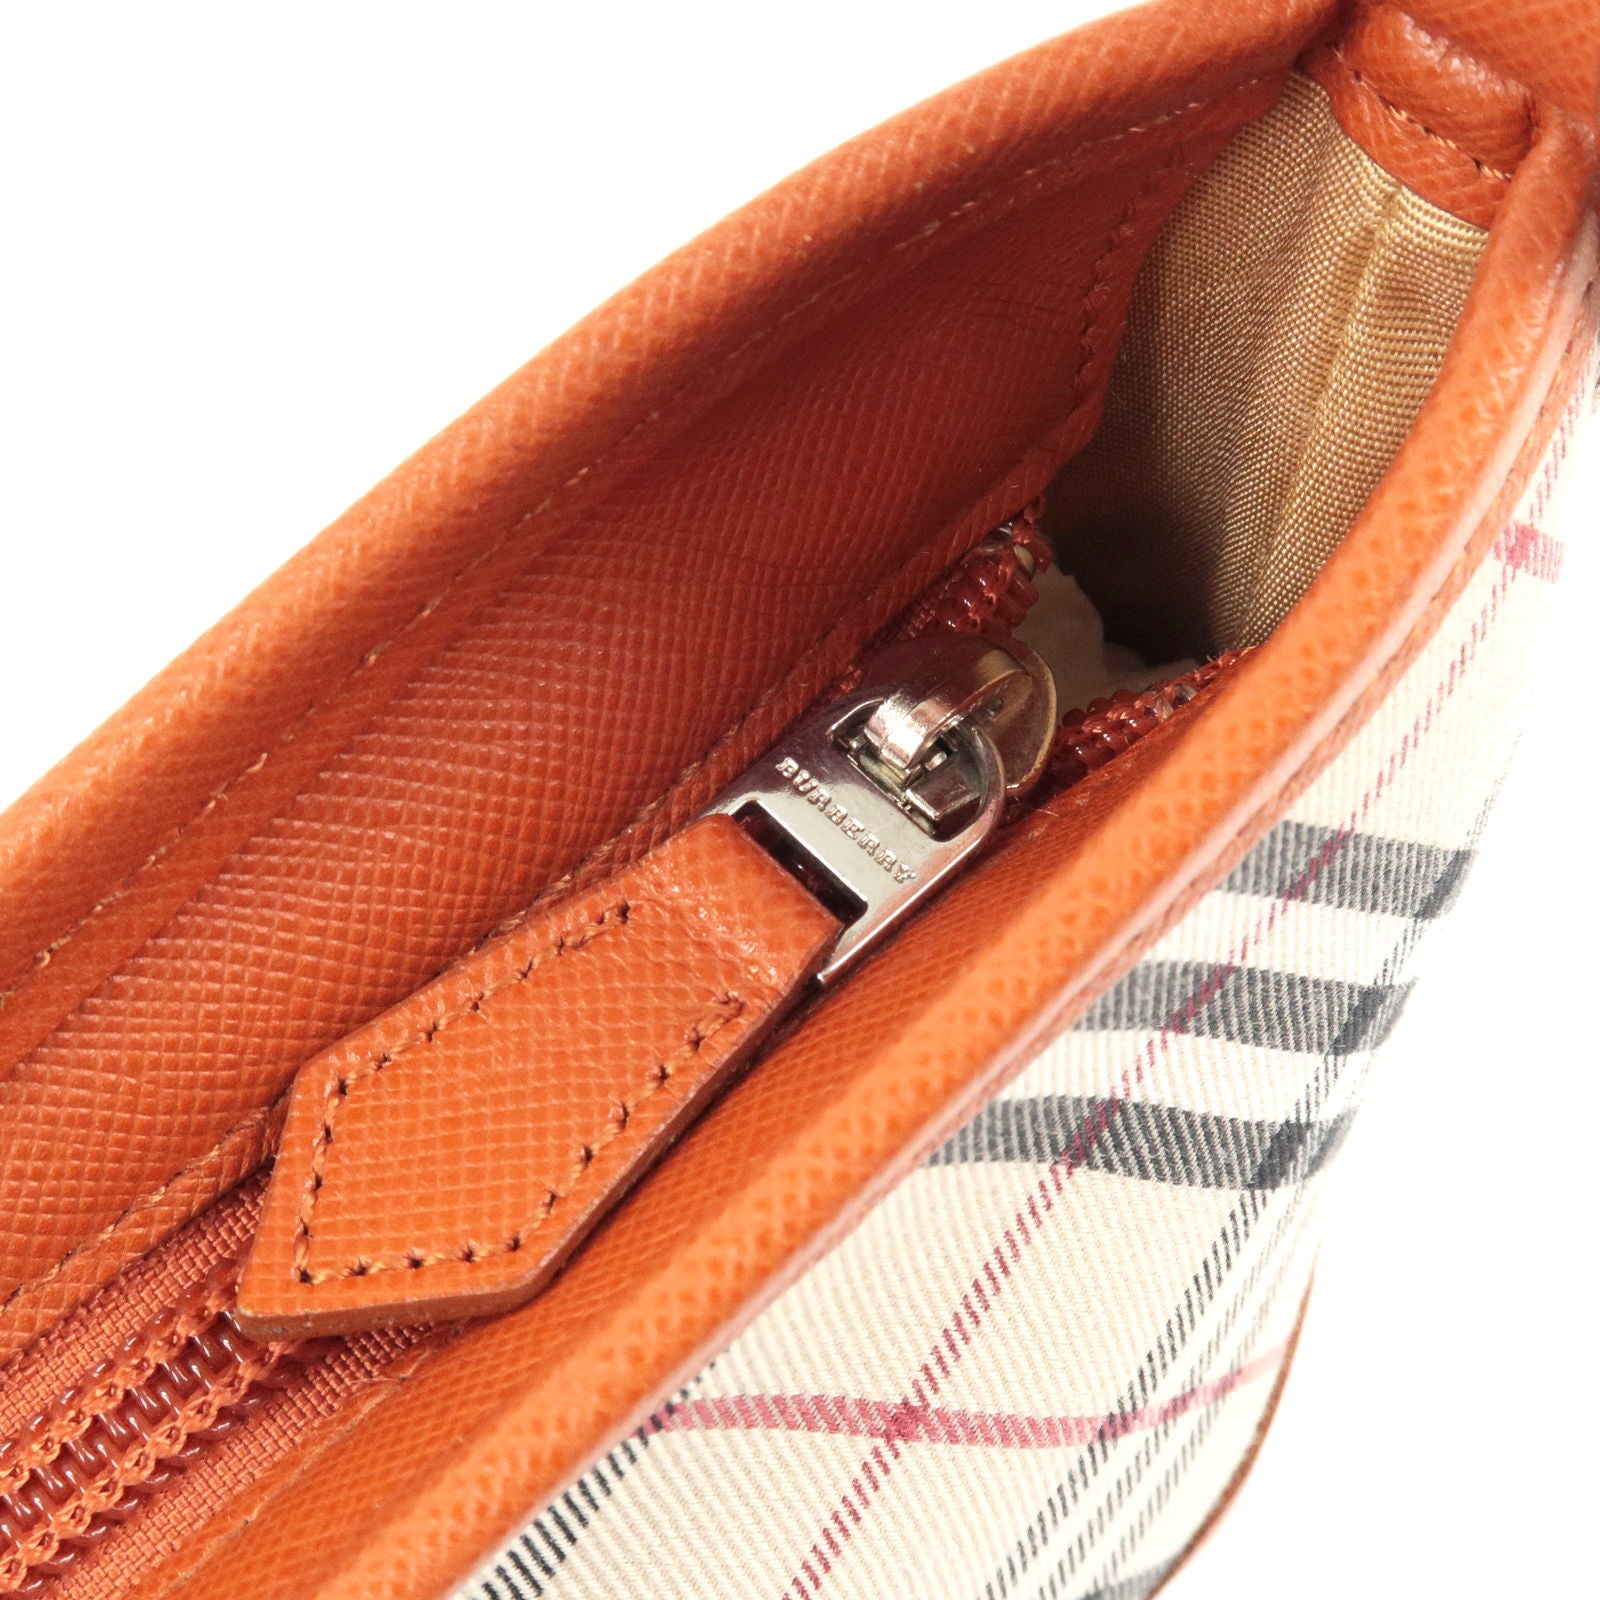 Burberry, Bags, Burberry Nova Check Plaid Red Leather Wallet